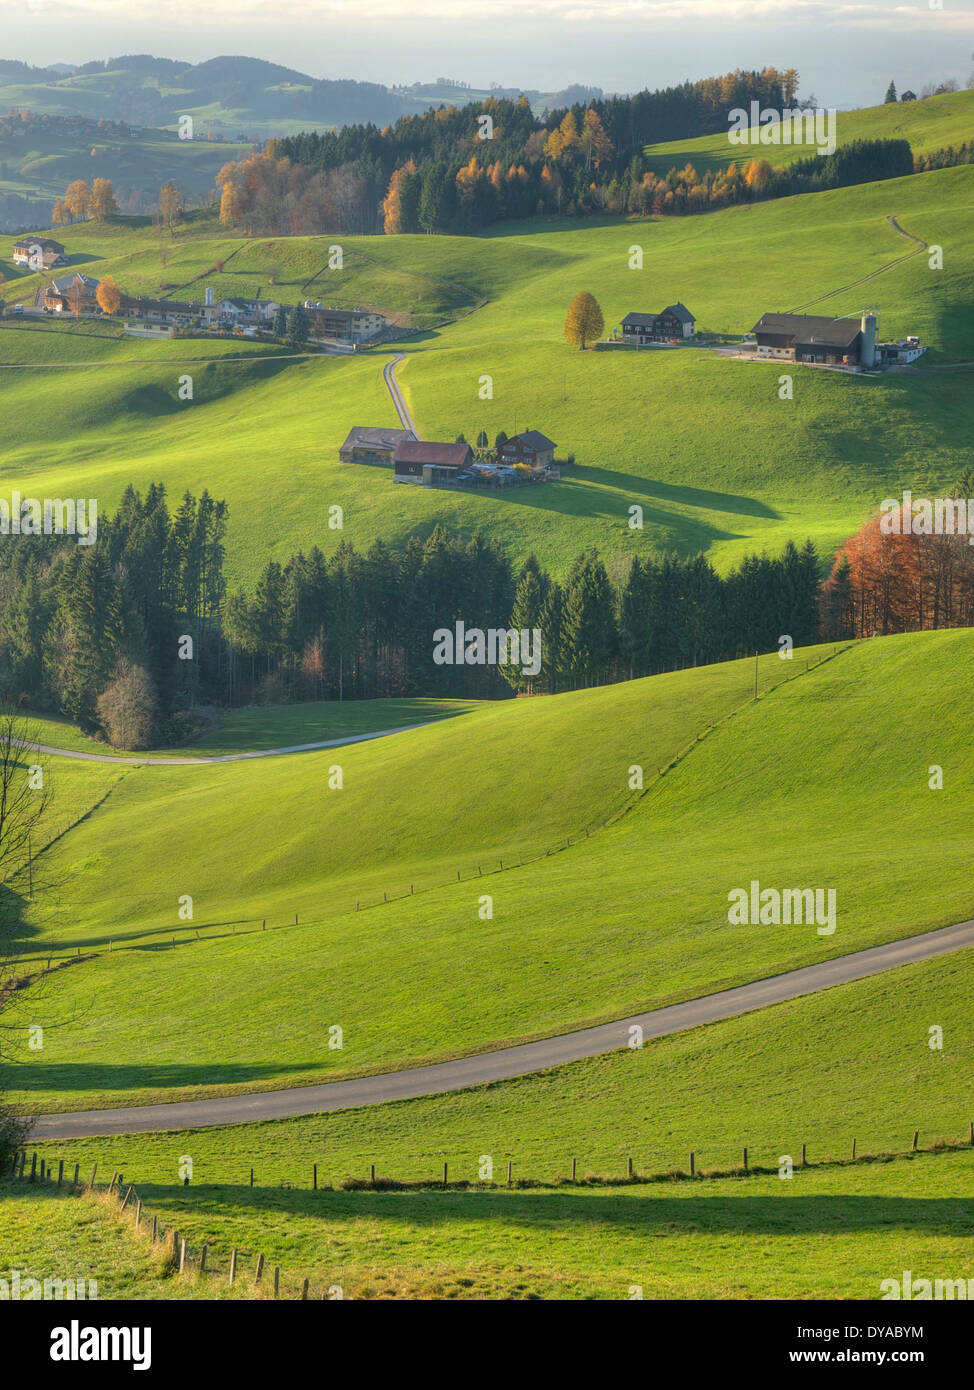 Appenzell, Switzerland, Europe, farms, hills, scenery, landscape, street, meadows, agriculture Stock Photo